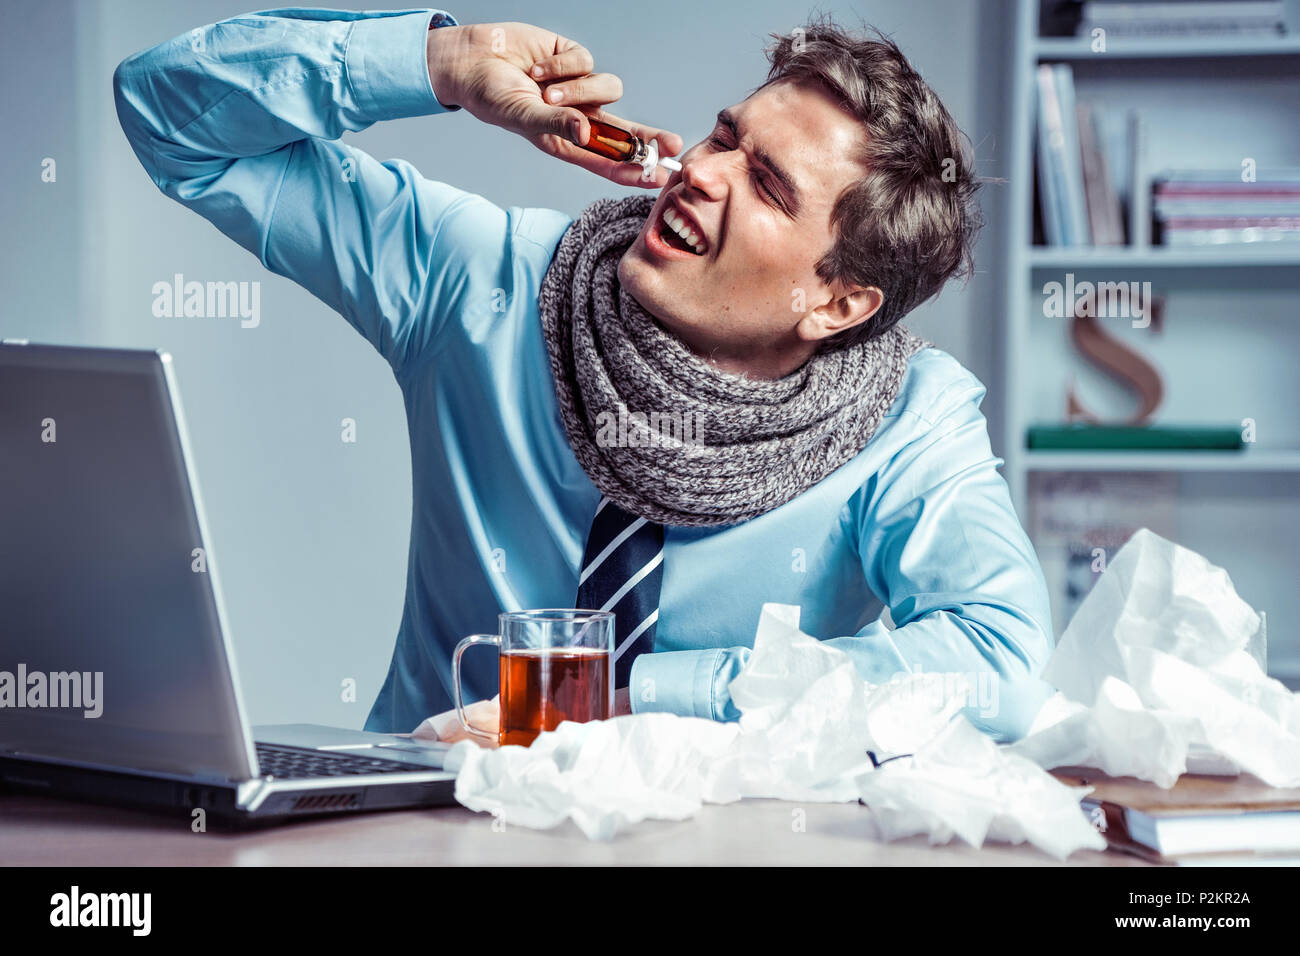 Sick employee using spray for nose. Photo of young man in office suffering virus of flu. Medical concept. Stock Photo